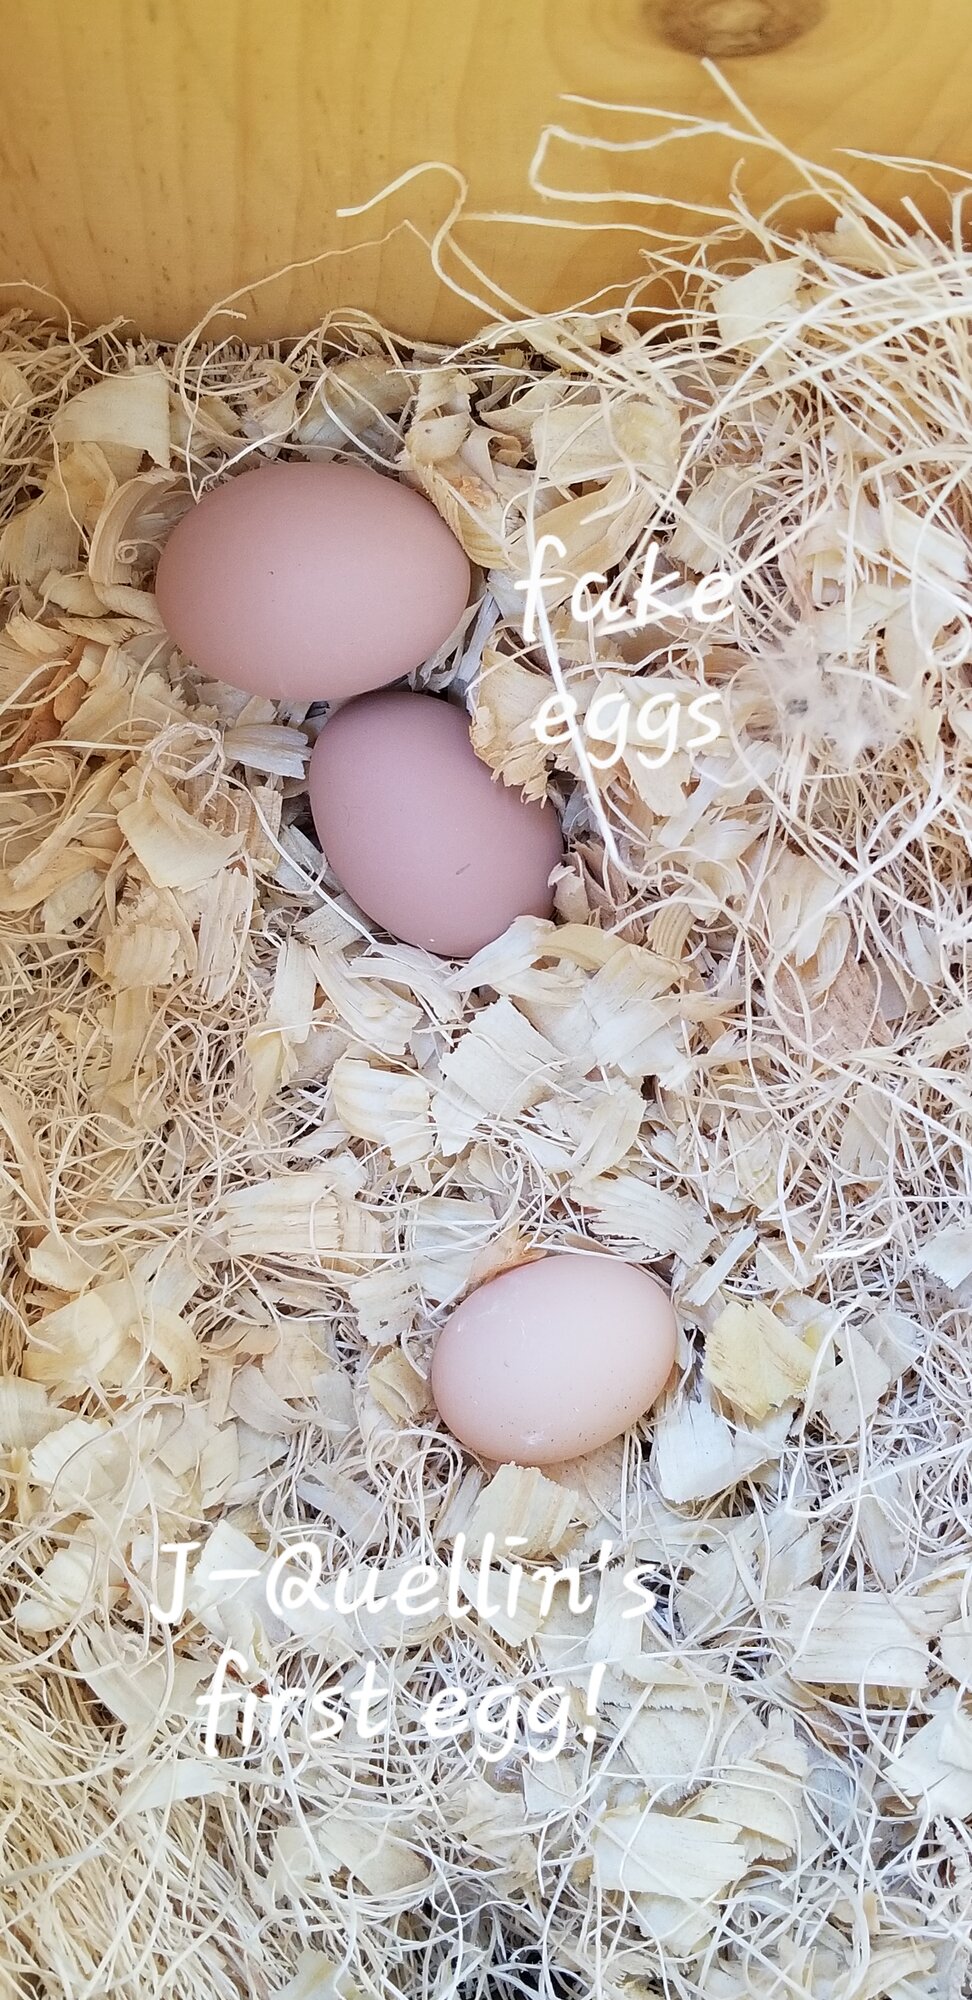 First egg too